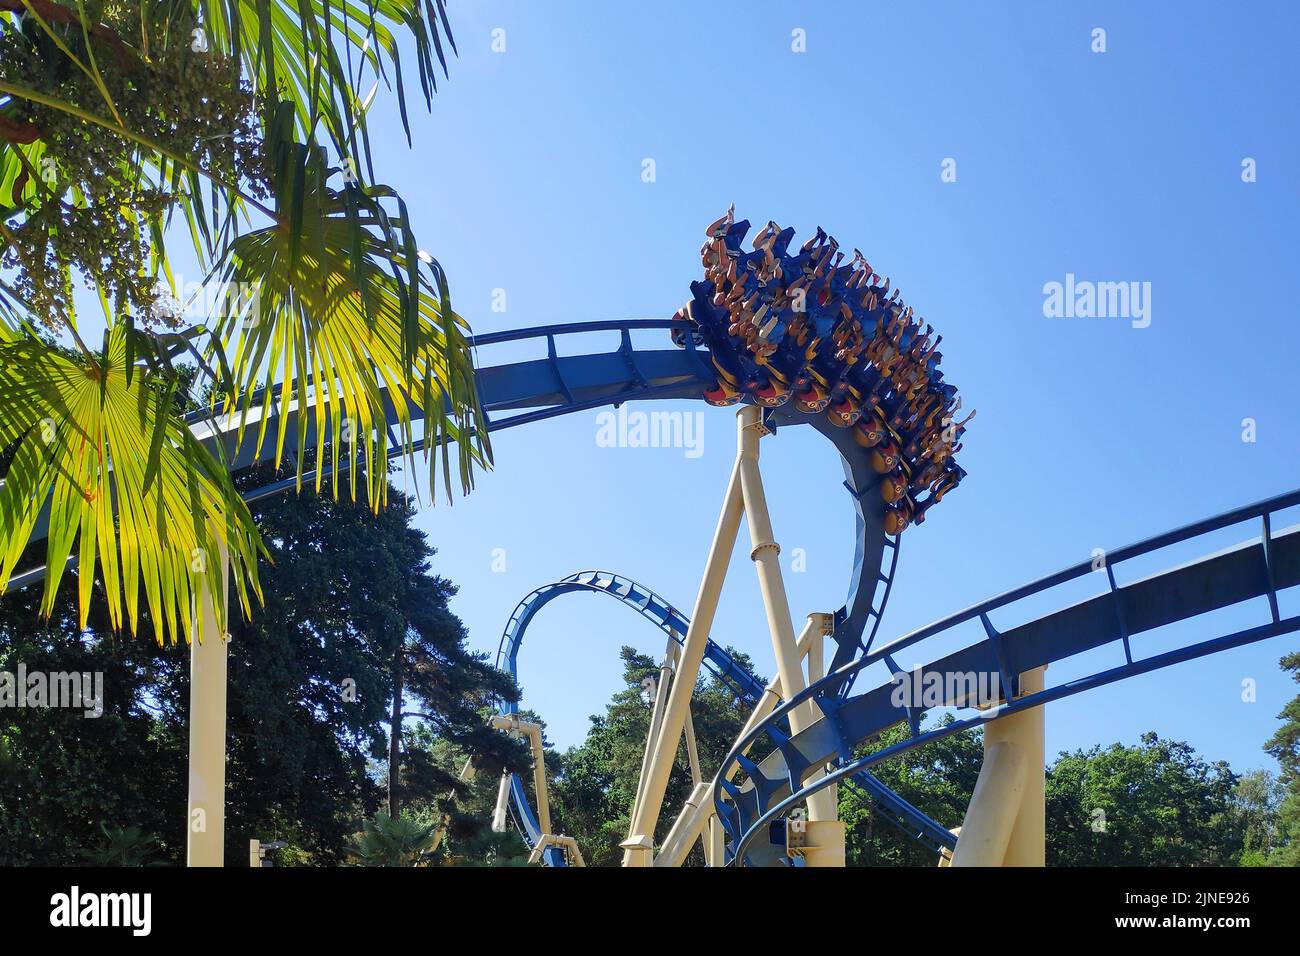 Plailly, France - August 10 2022: OzIris is a steel inverted roller coaster located in Parc Astérix, a theme park in France based on the comic book se Stock Photo